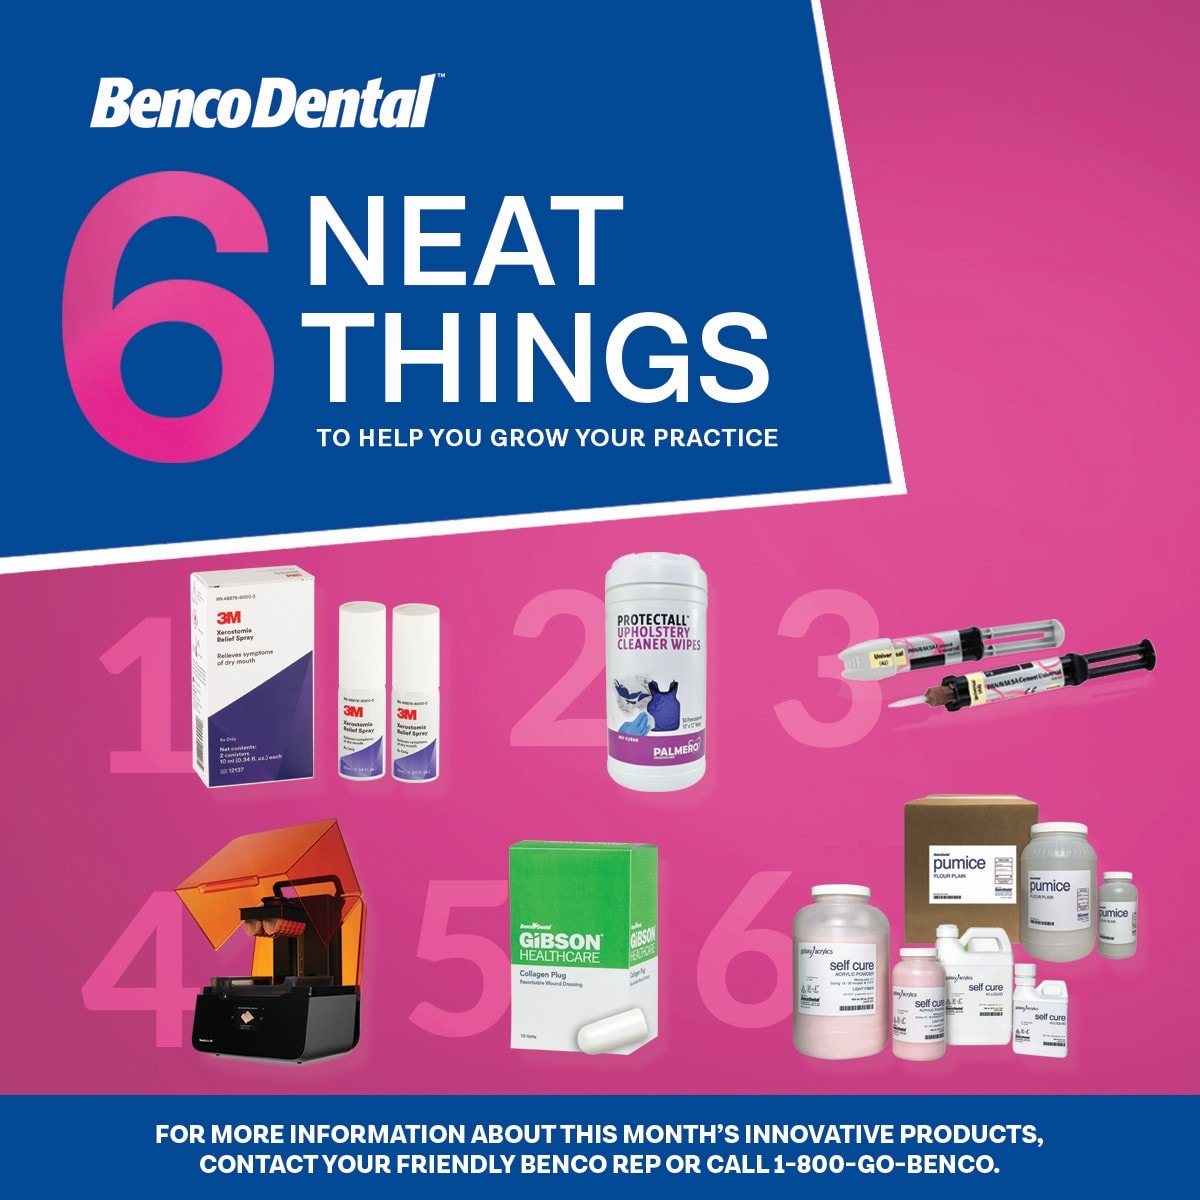 Promotional image: The 6 Neat Things feature the 3M Xerostomia, Protectall Upholstery Cleaner Wipes, SA Cement Universal, Formlabs Form 3, Gibson Healthcare Collagen Plugs and Benco Dental lab supplies.